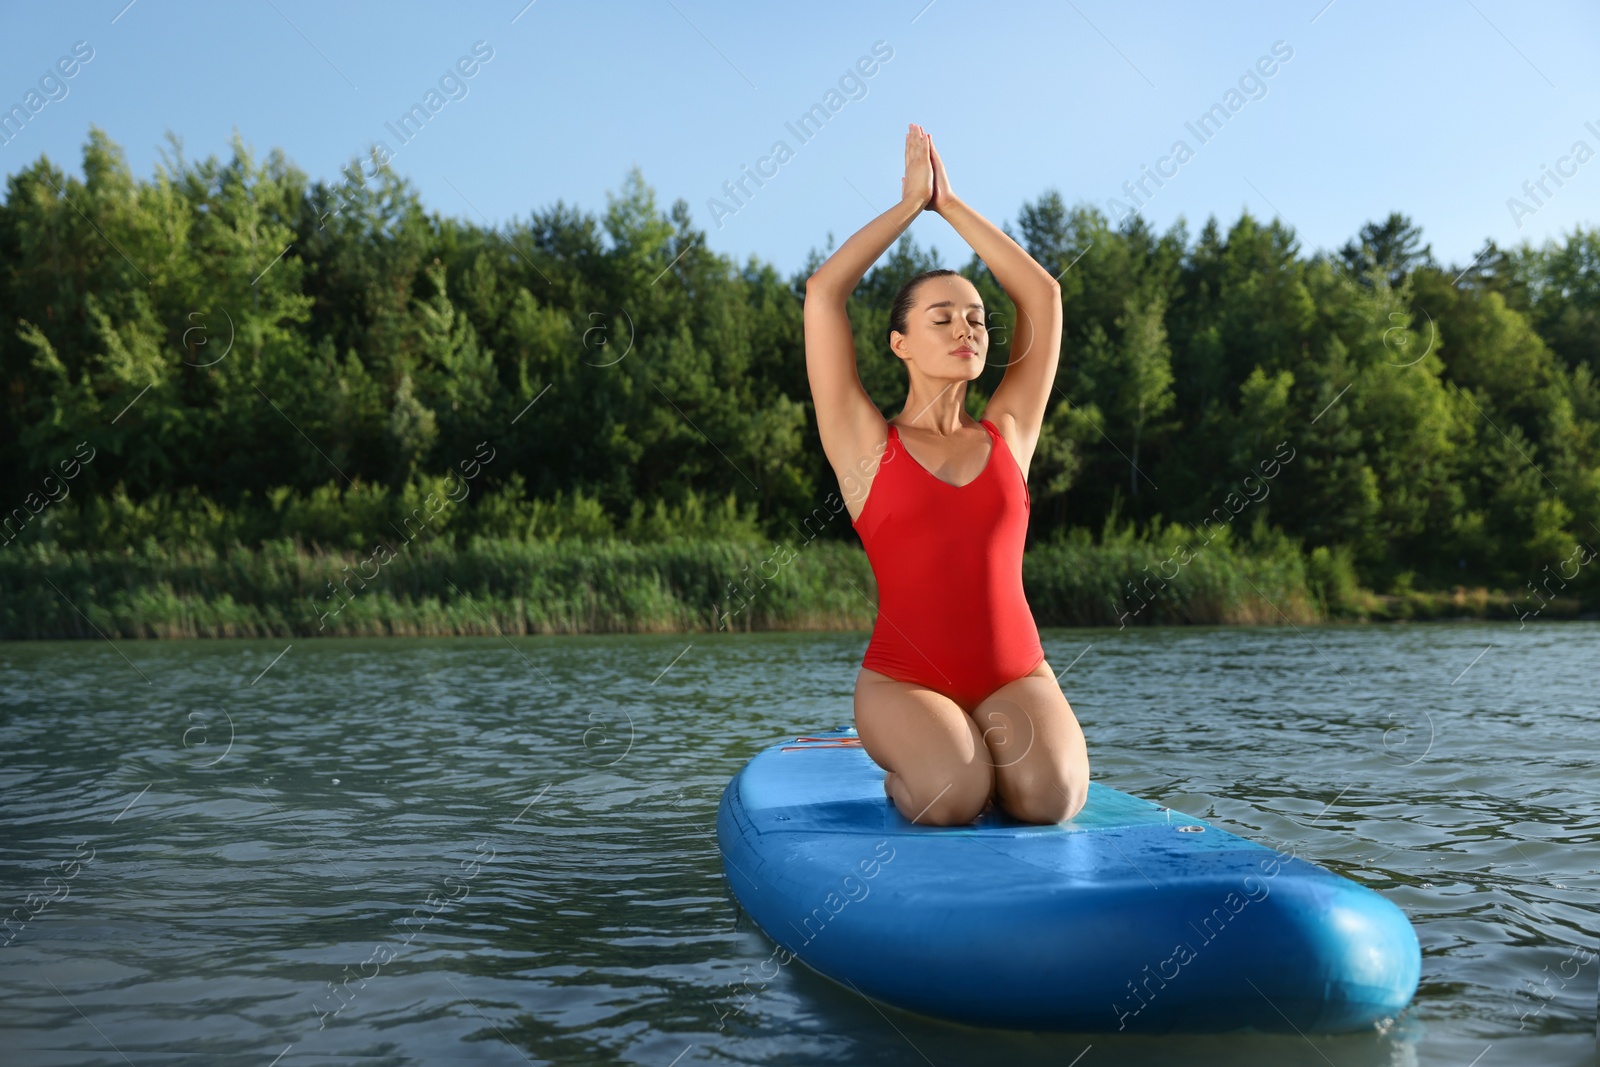 Photo of Young woman practicing yoga on light blue SUP board on river